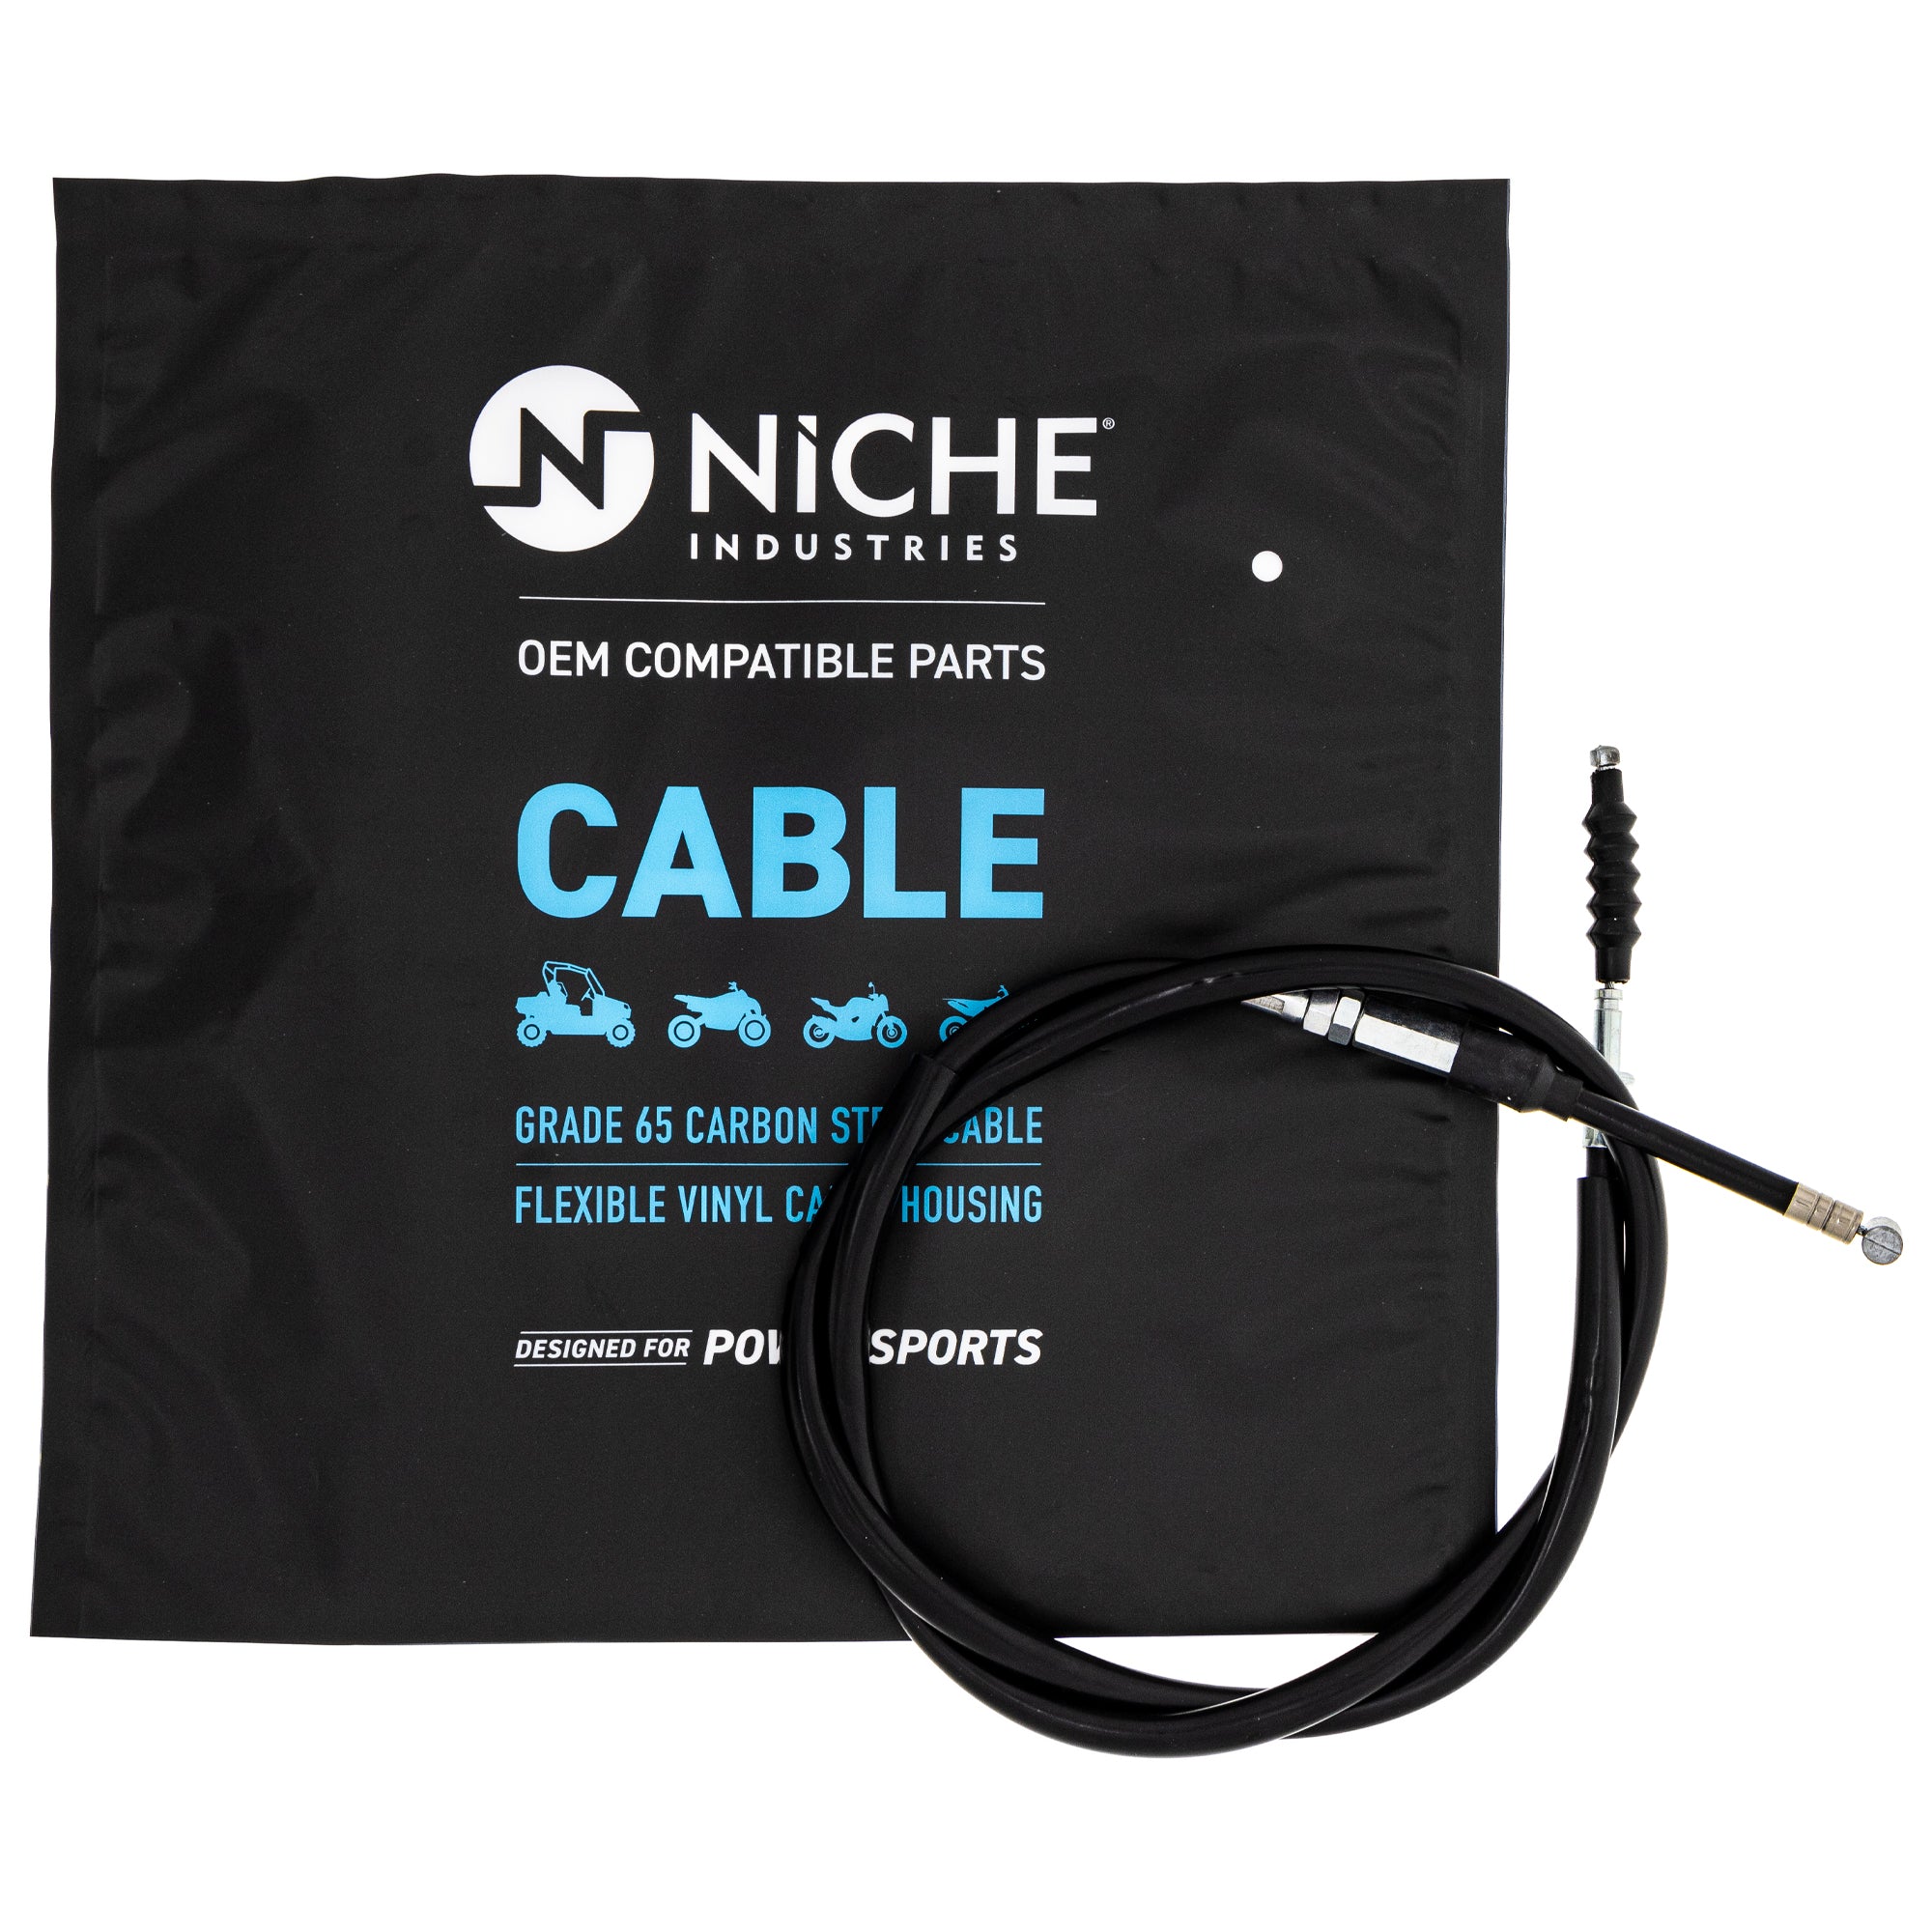 NICHE 519-CCB2733L Clutch Cable for zOTHER XR350R XL350R